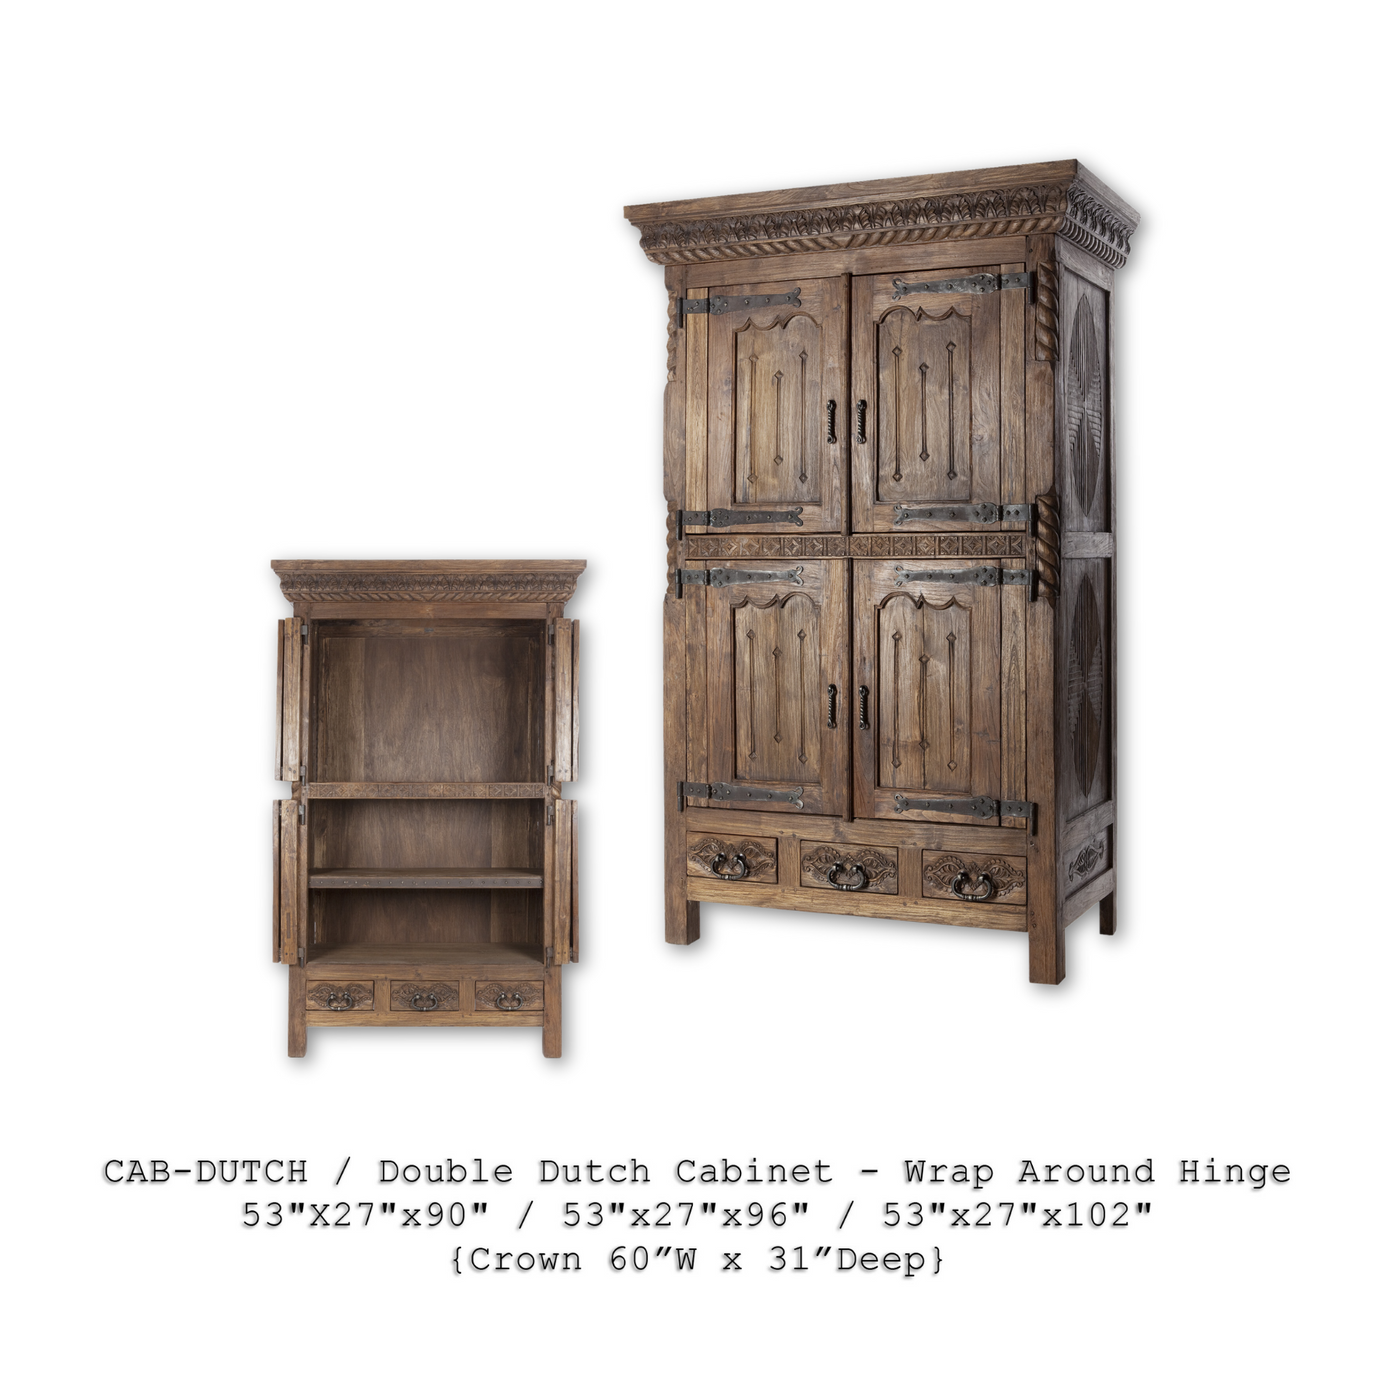 Double Dutch Cabinet With Wrap Around Hinge